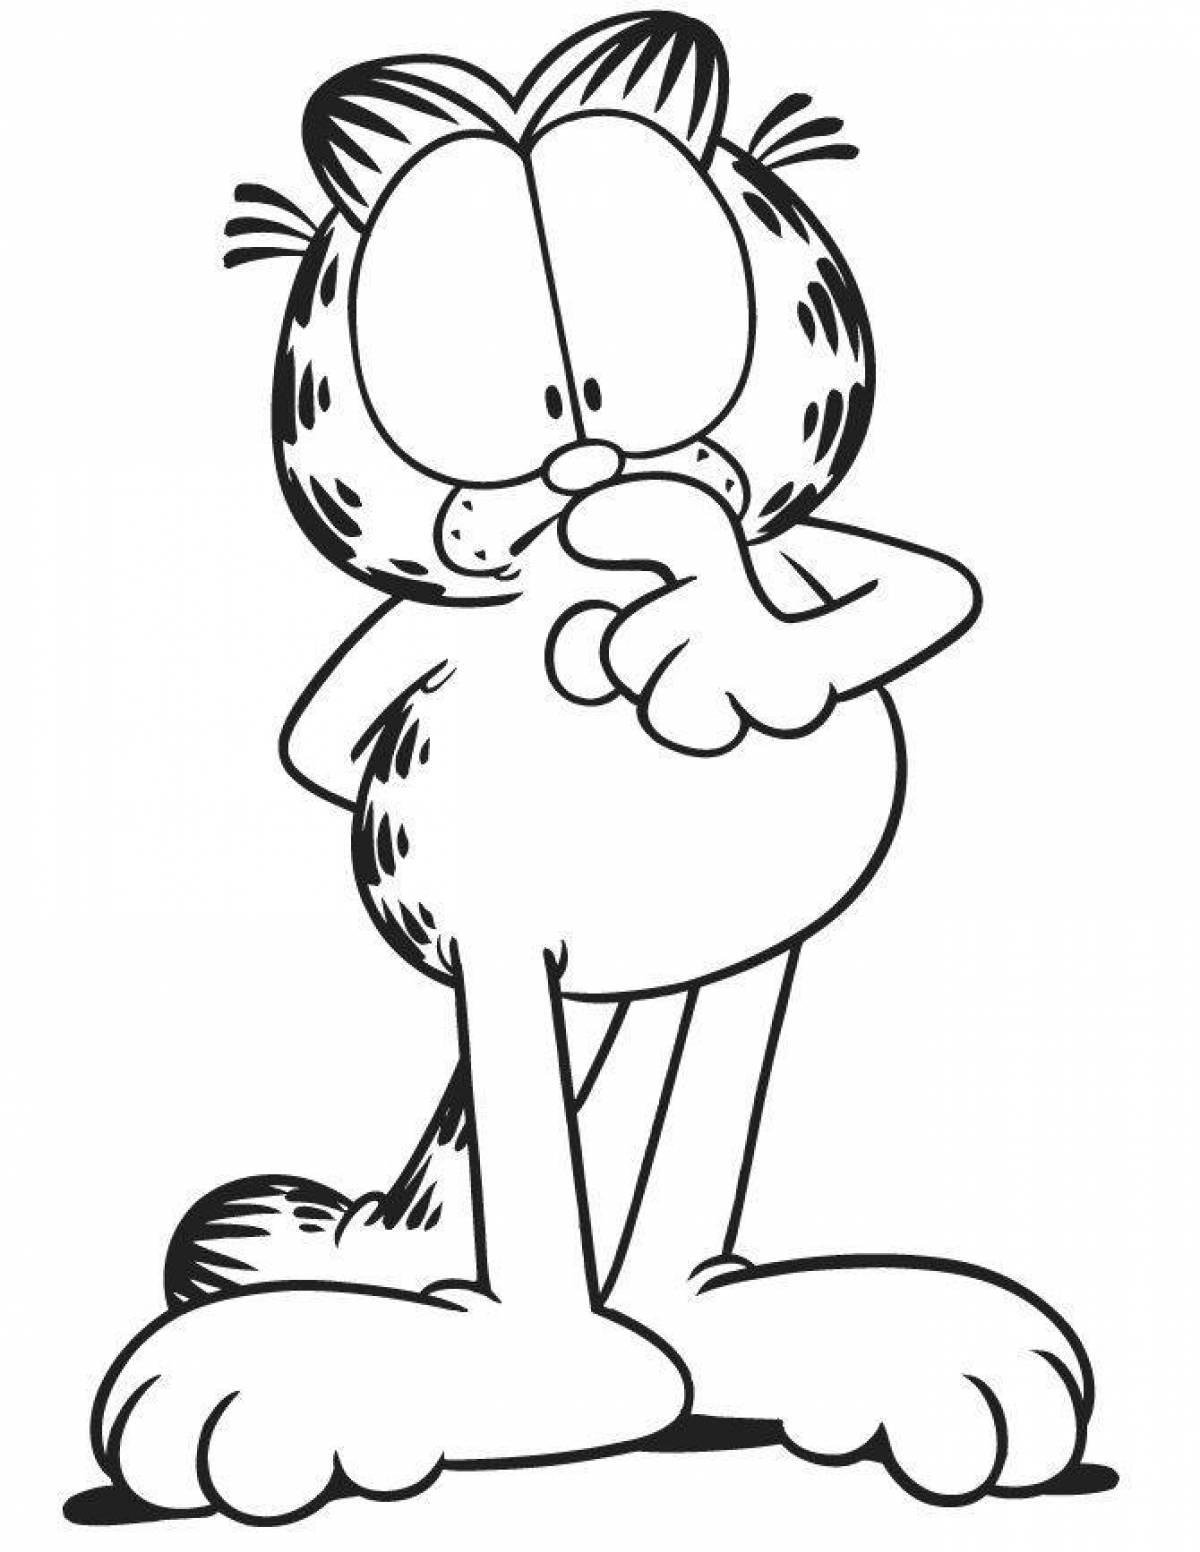 Garfield animated coloring page